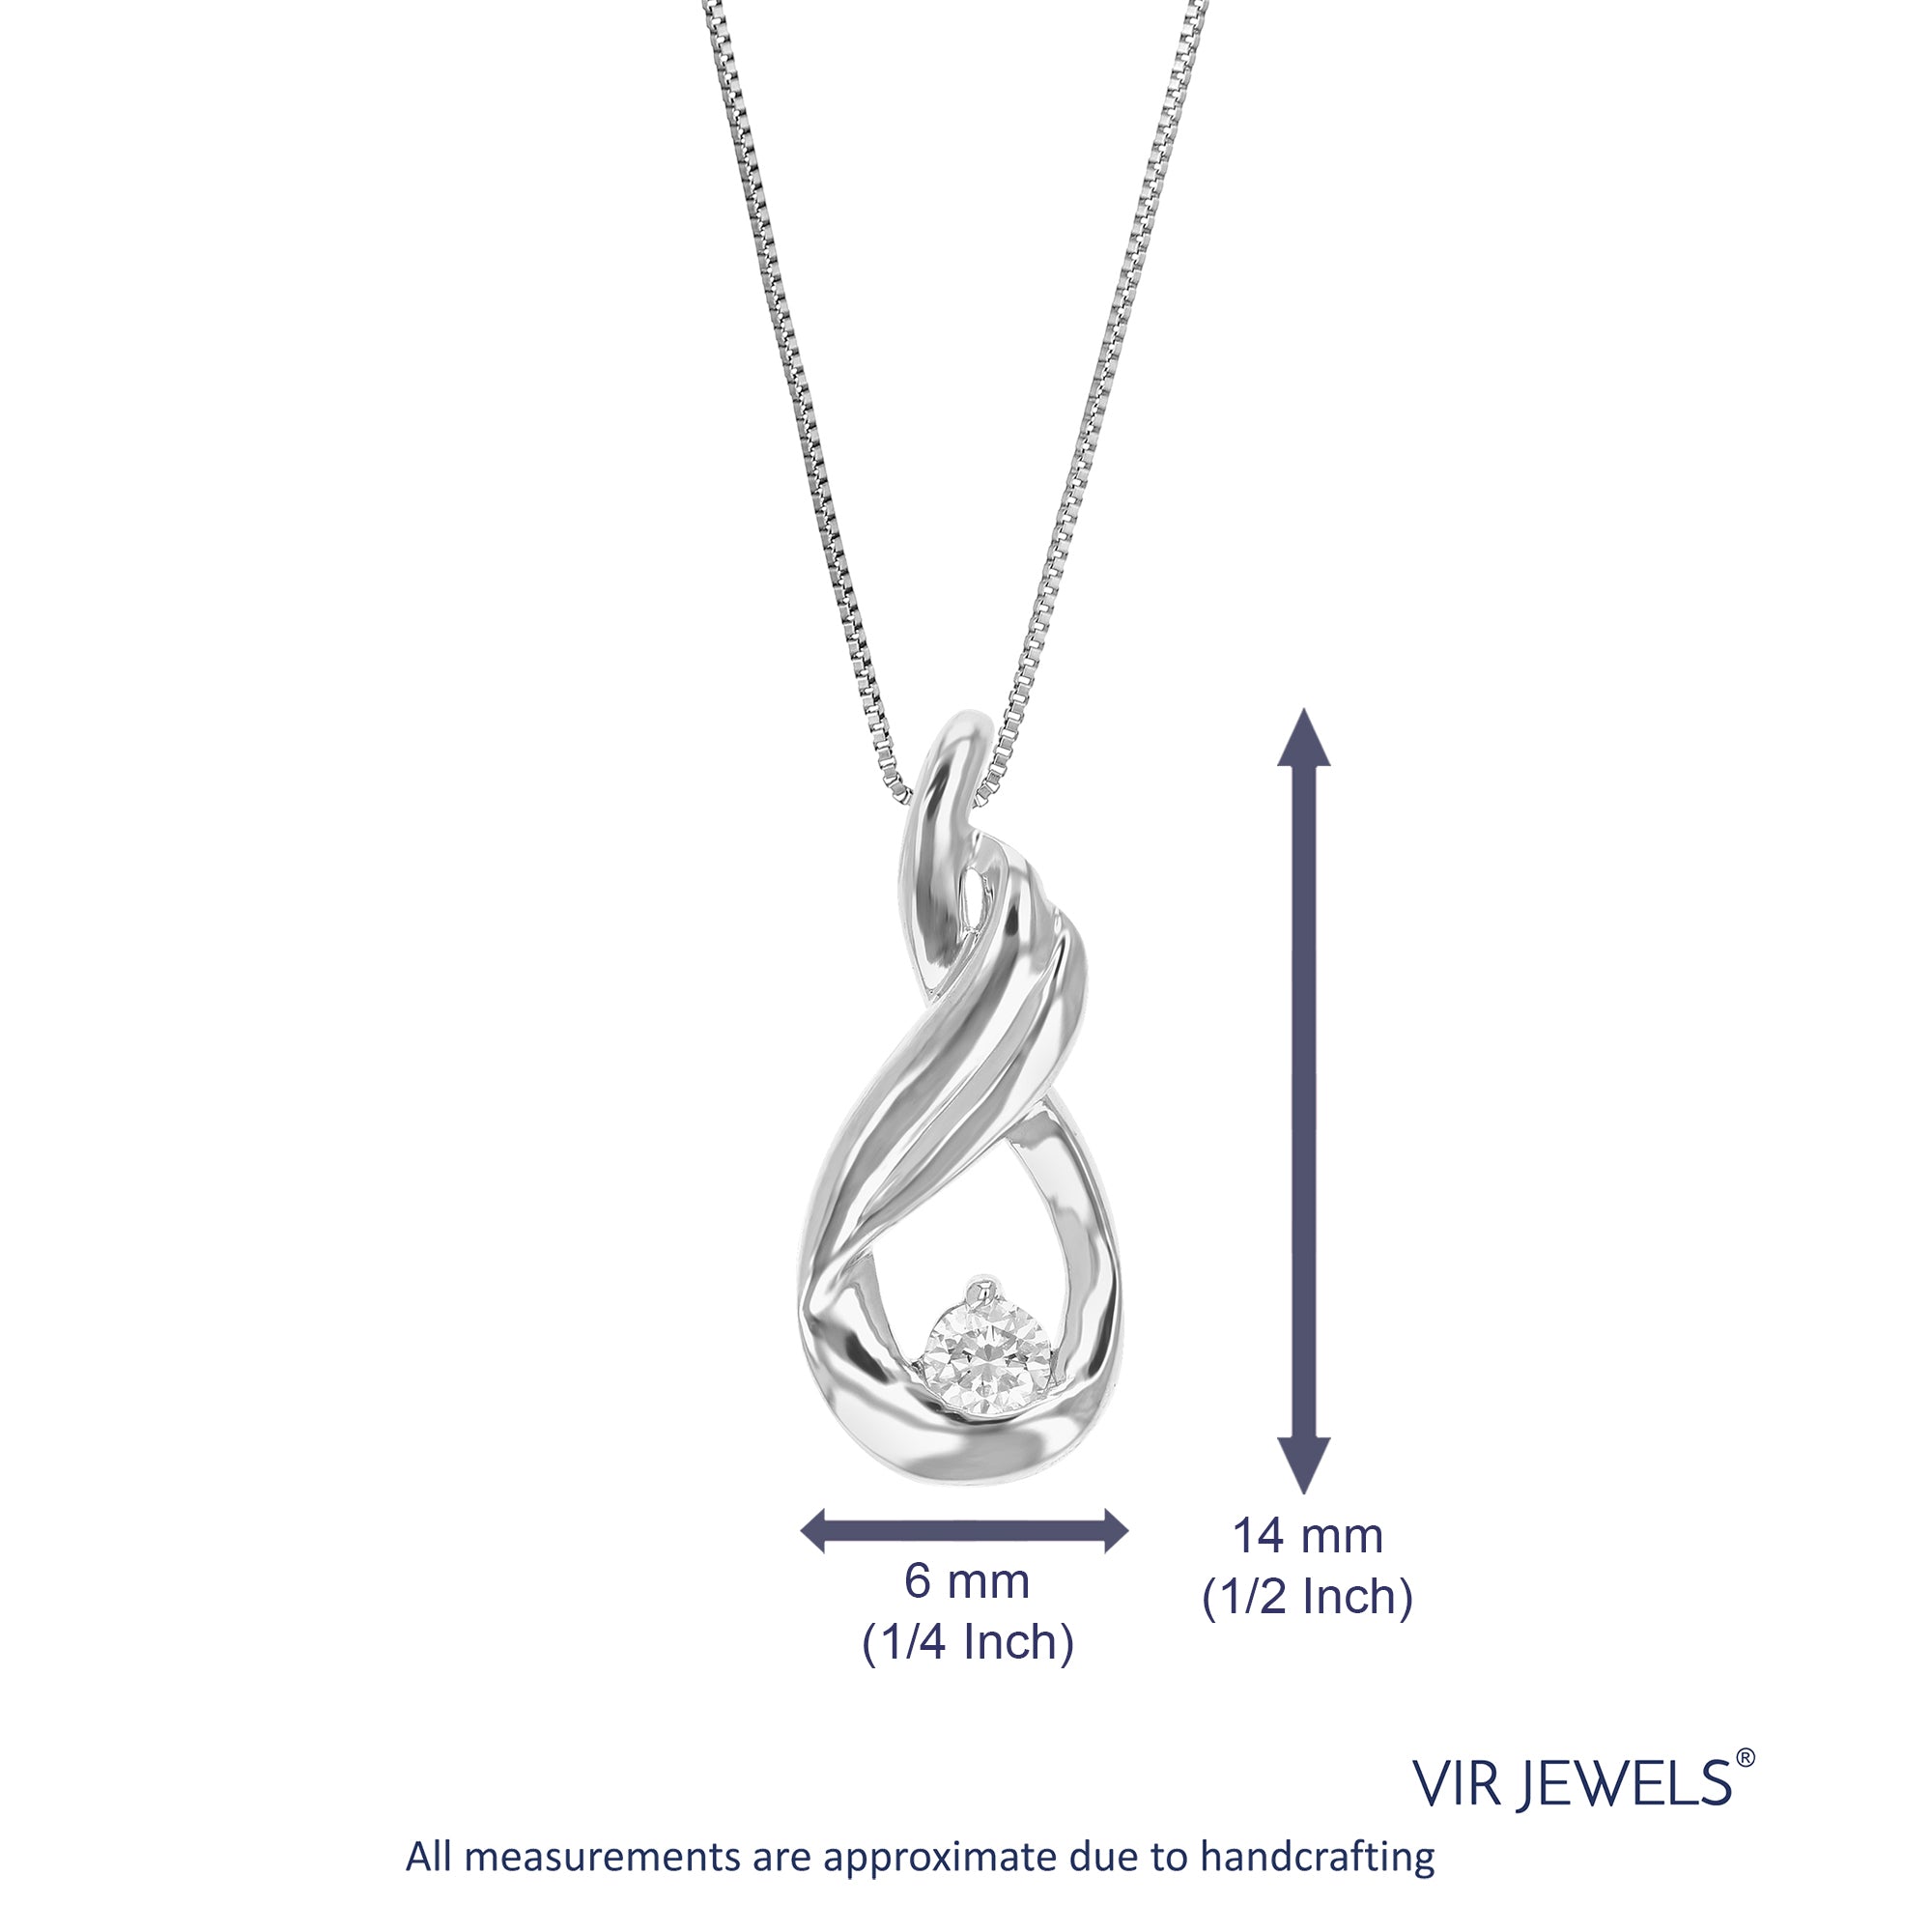 1/20 cttw Diamond Pendant Necklace for Women, Lab Grown Diamond Solitaire Pendant Necklace in .925 Sterling Silver with Chain, Size 3/4 Inch